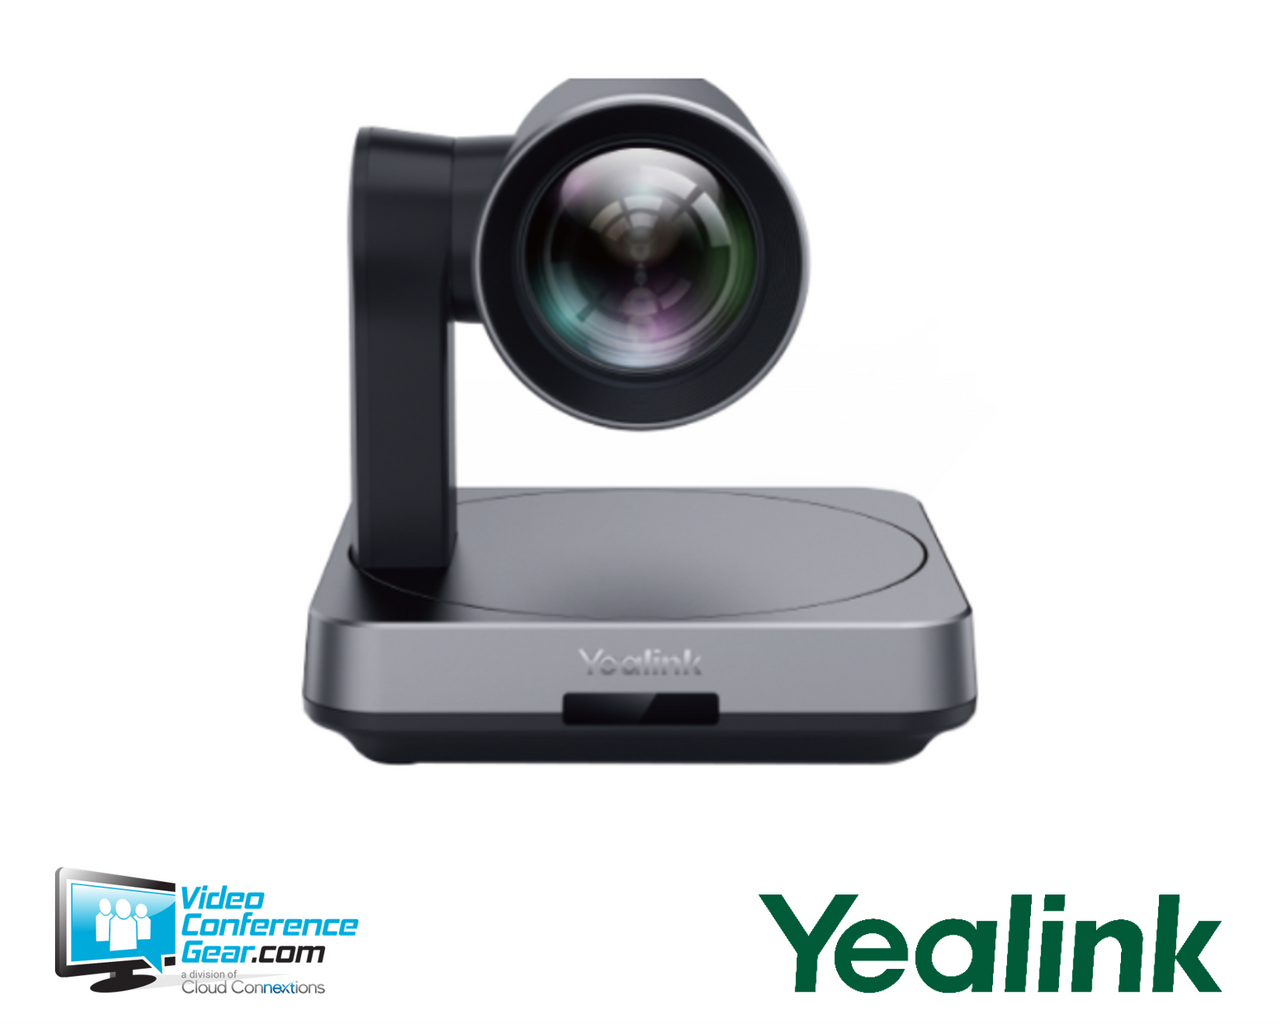 Yealink UVC84 4K Video Conferencing Camera with 12x Optical Zoom